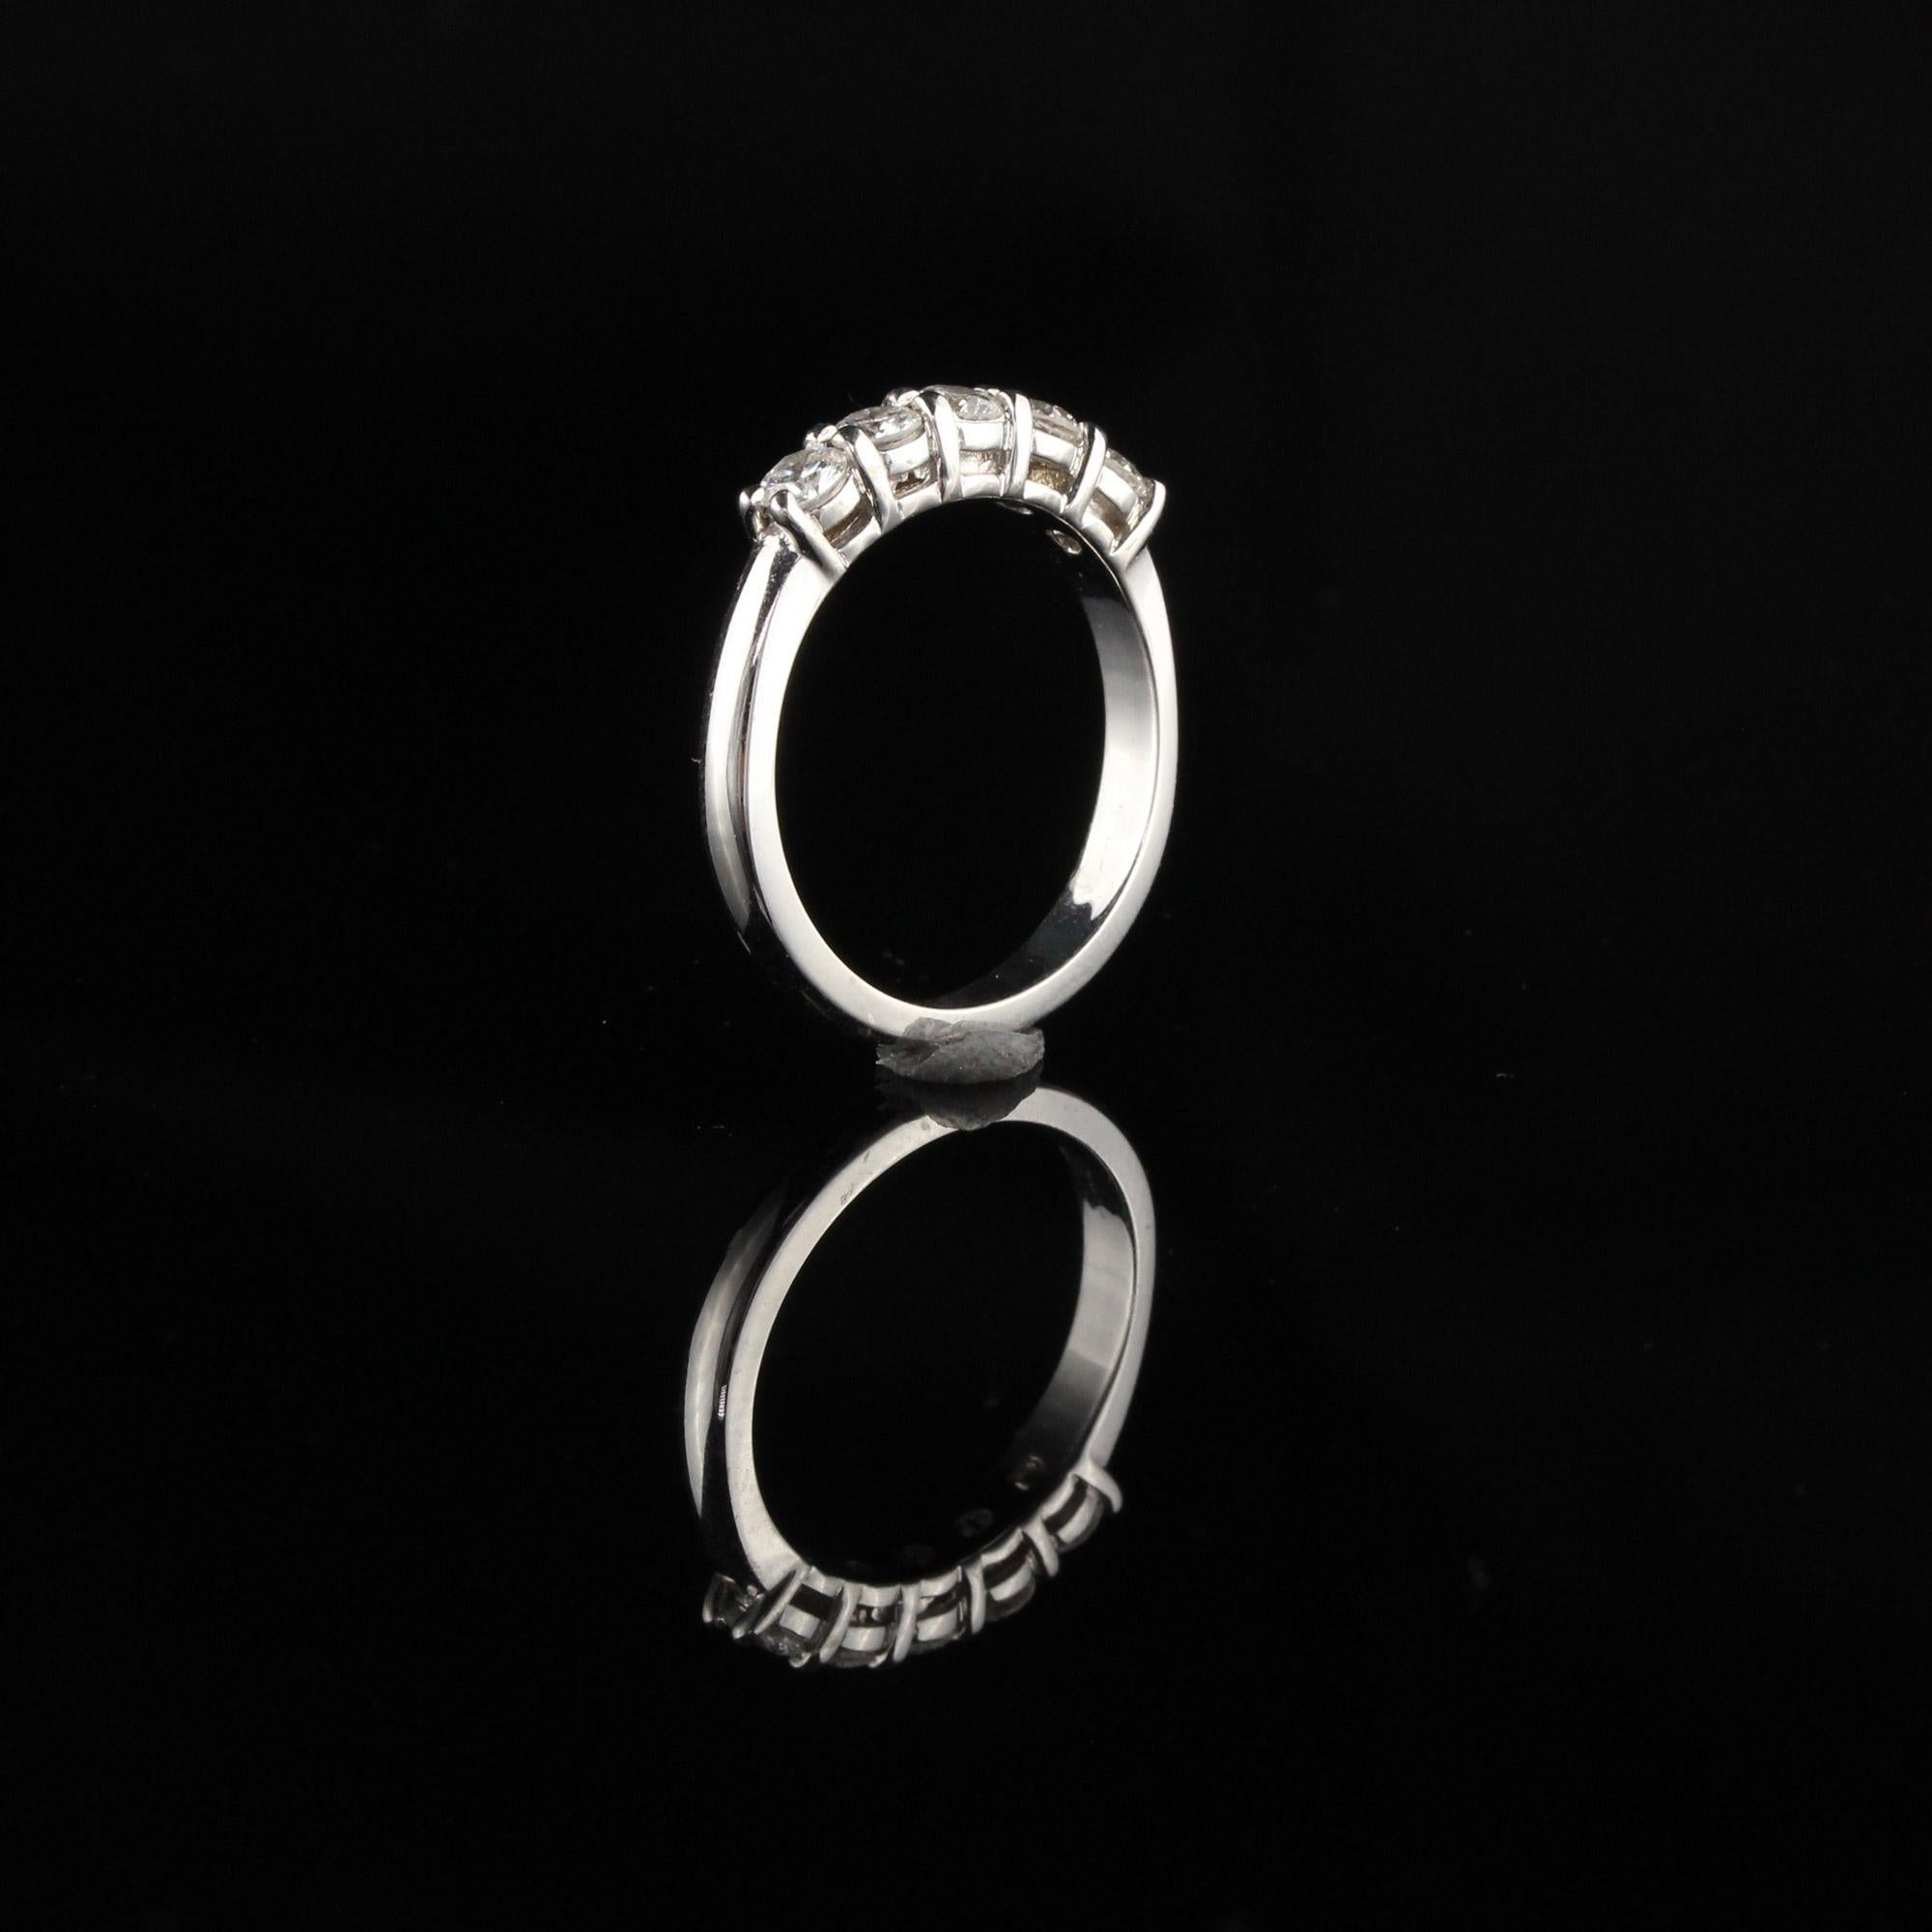 Vintage Estate 14 Karat White Gold Diamond Band In Excellent Condition For Sale In Great Neck, NY